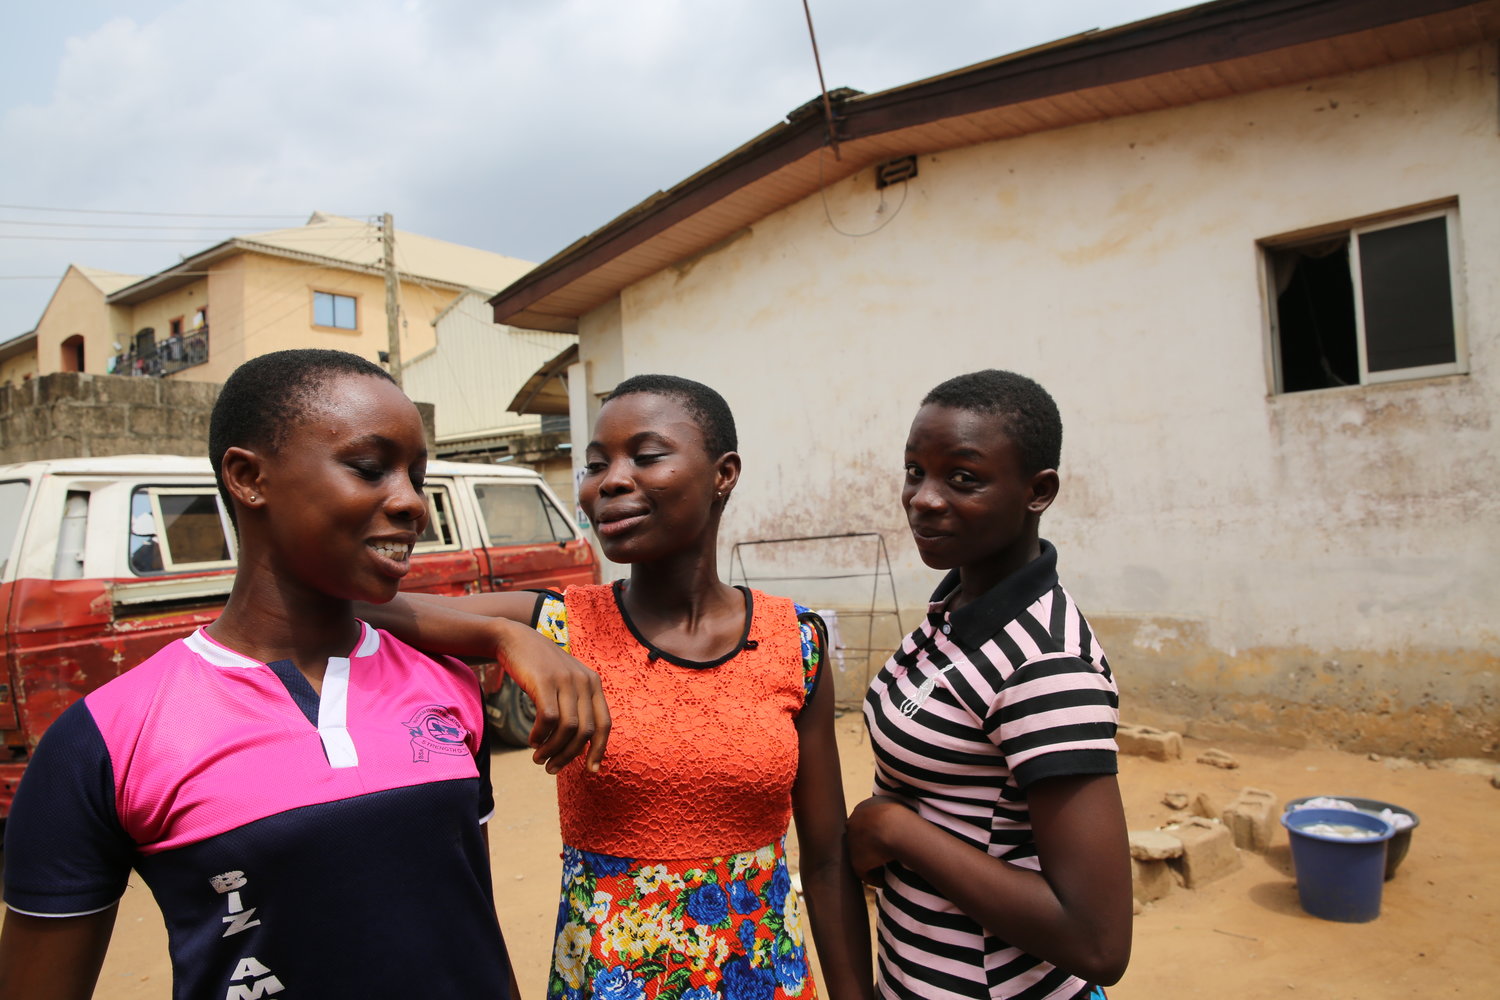  Girls across Nigeria face deep cultural and societal challenges in accessing contraceptives. A360's&nbsp; 9ja Girls programming works within the complexity of this system to meet girls, and their influencers, where they are and how they need. 